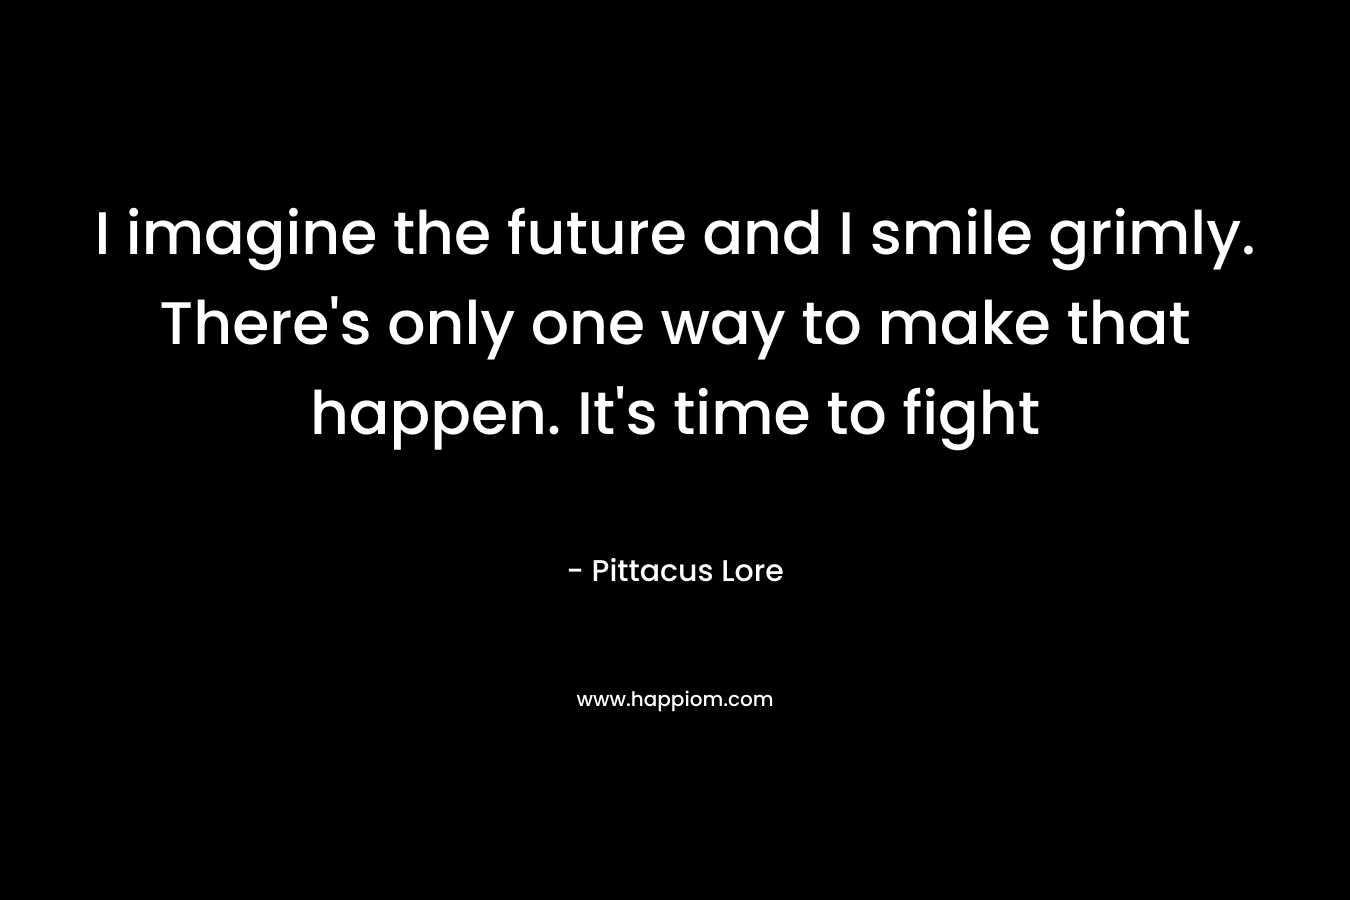 I imagine the future and I smile grimly. There’s only one way to make that happen. It’s time to fight – Pittacus Lore